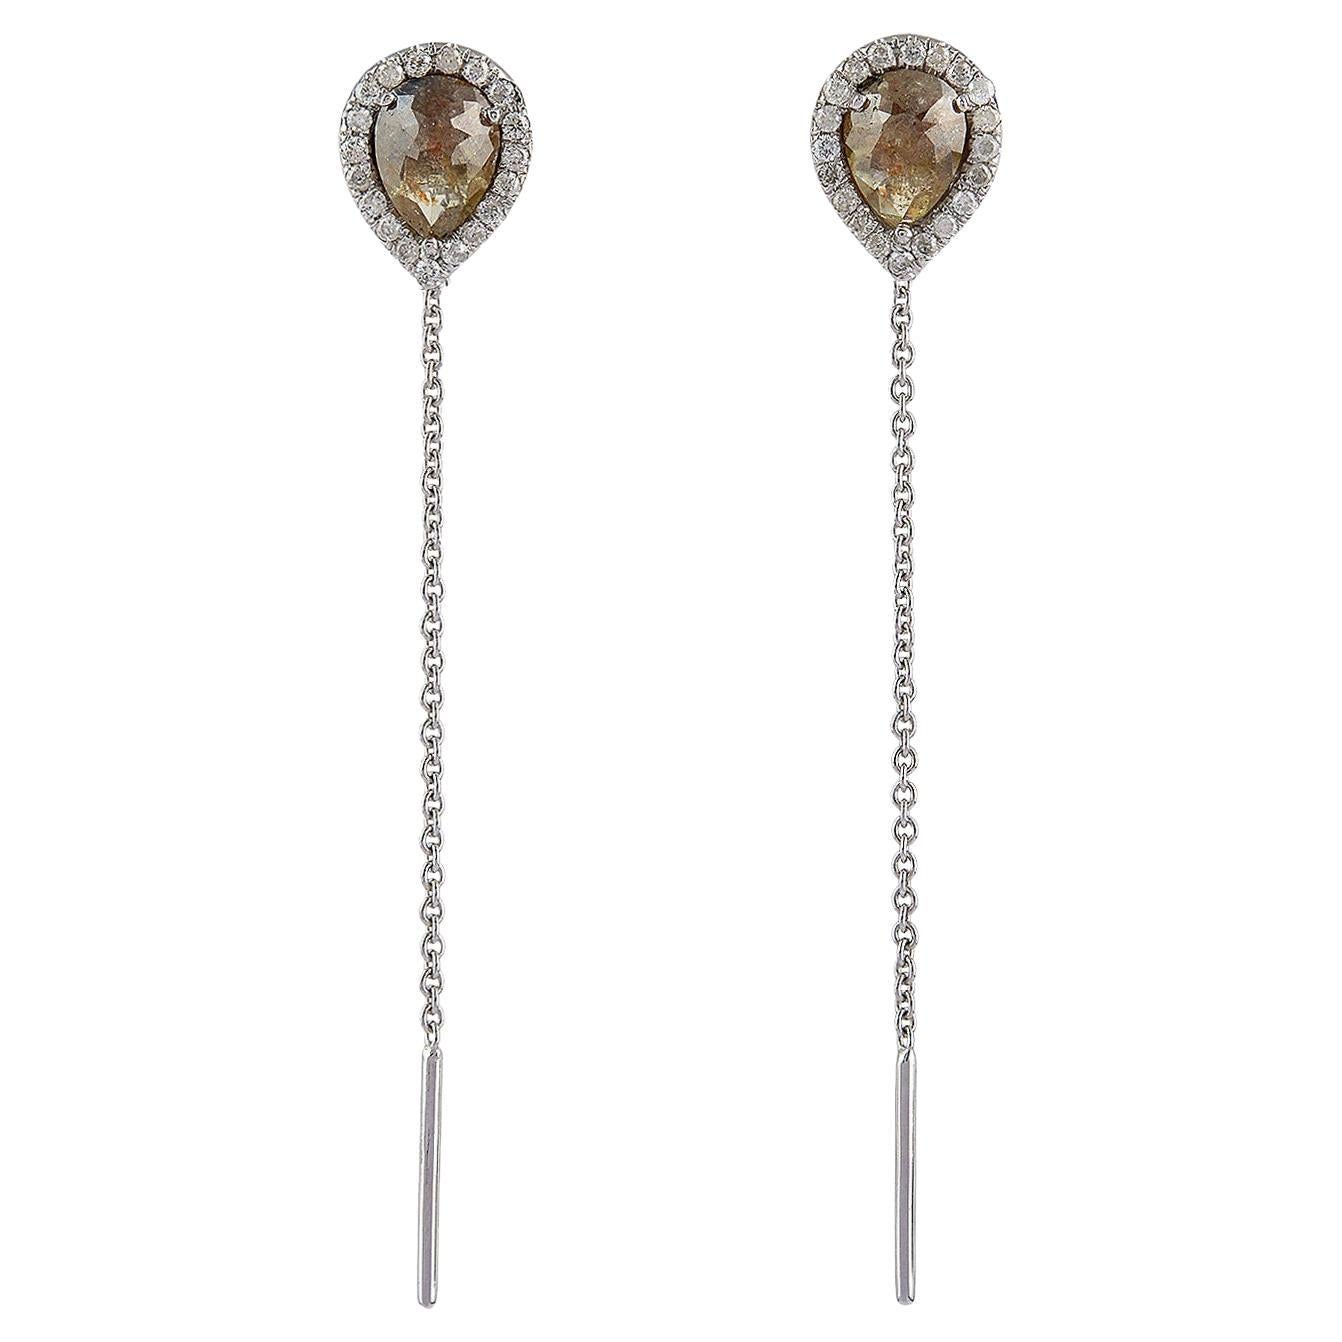 Designer Thread Earring with Ice Diamonds and Pave Diamonds in 18k Gold